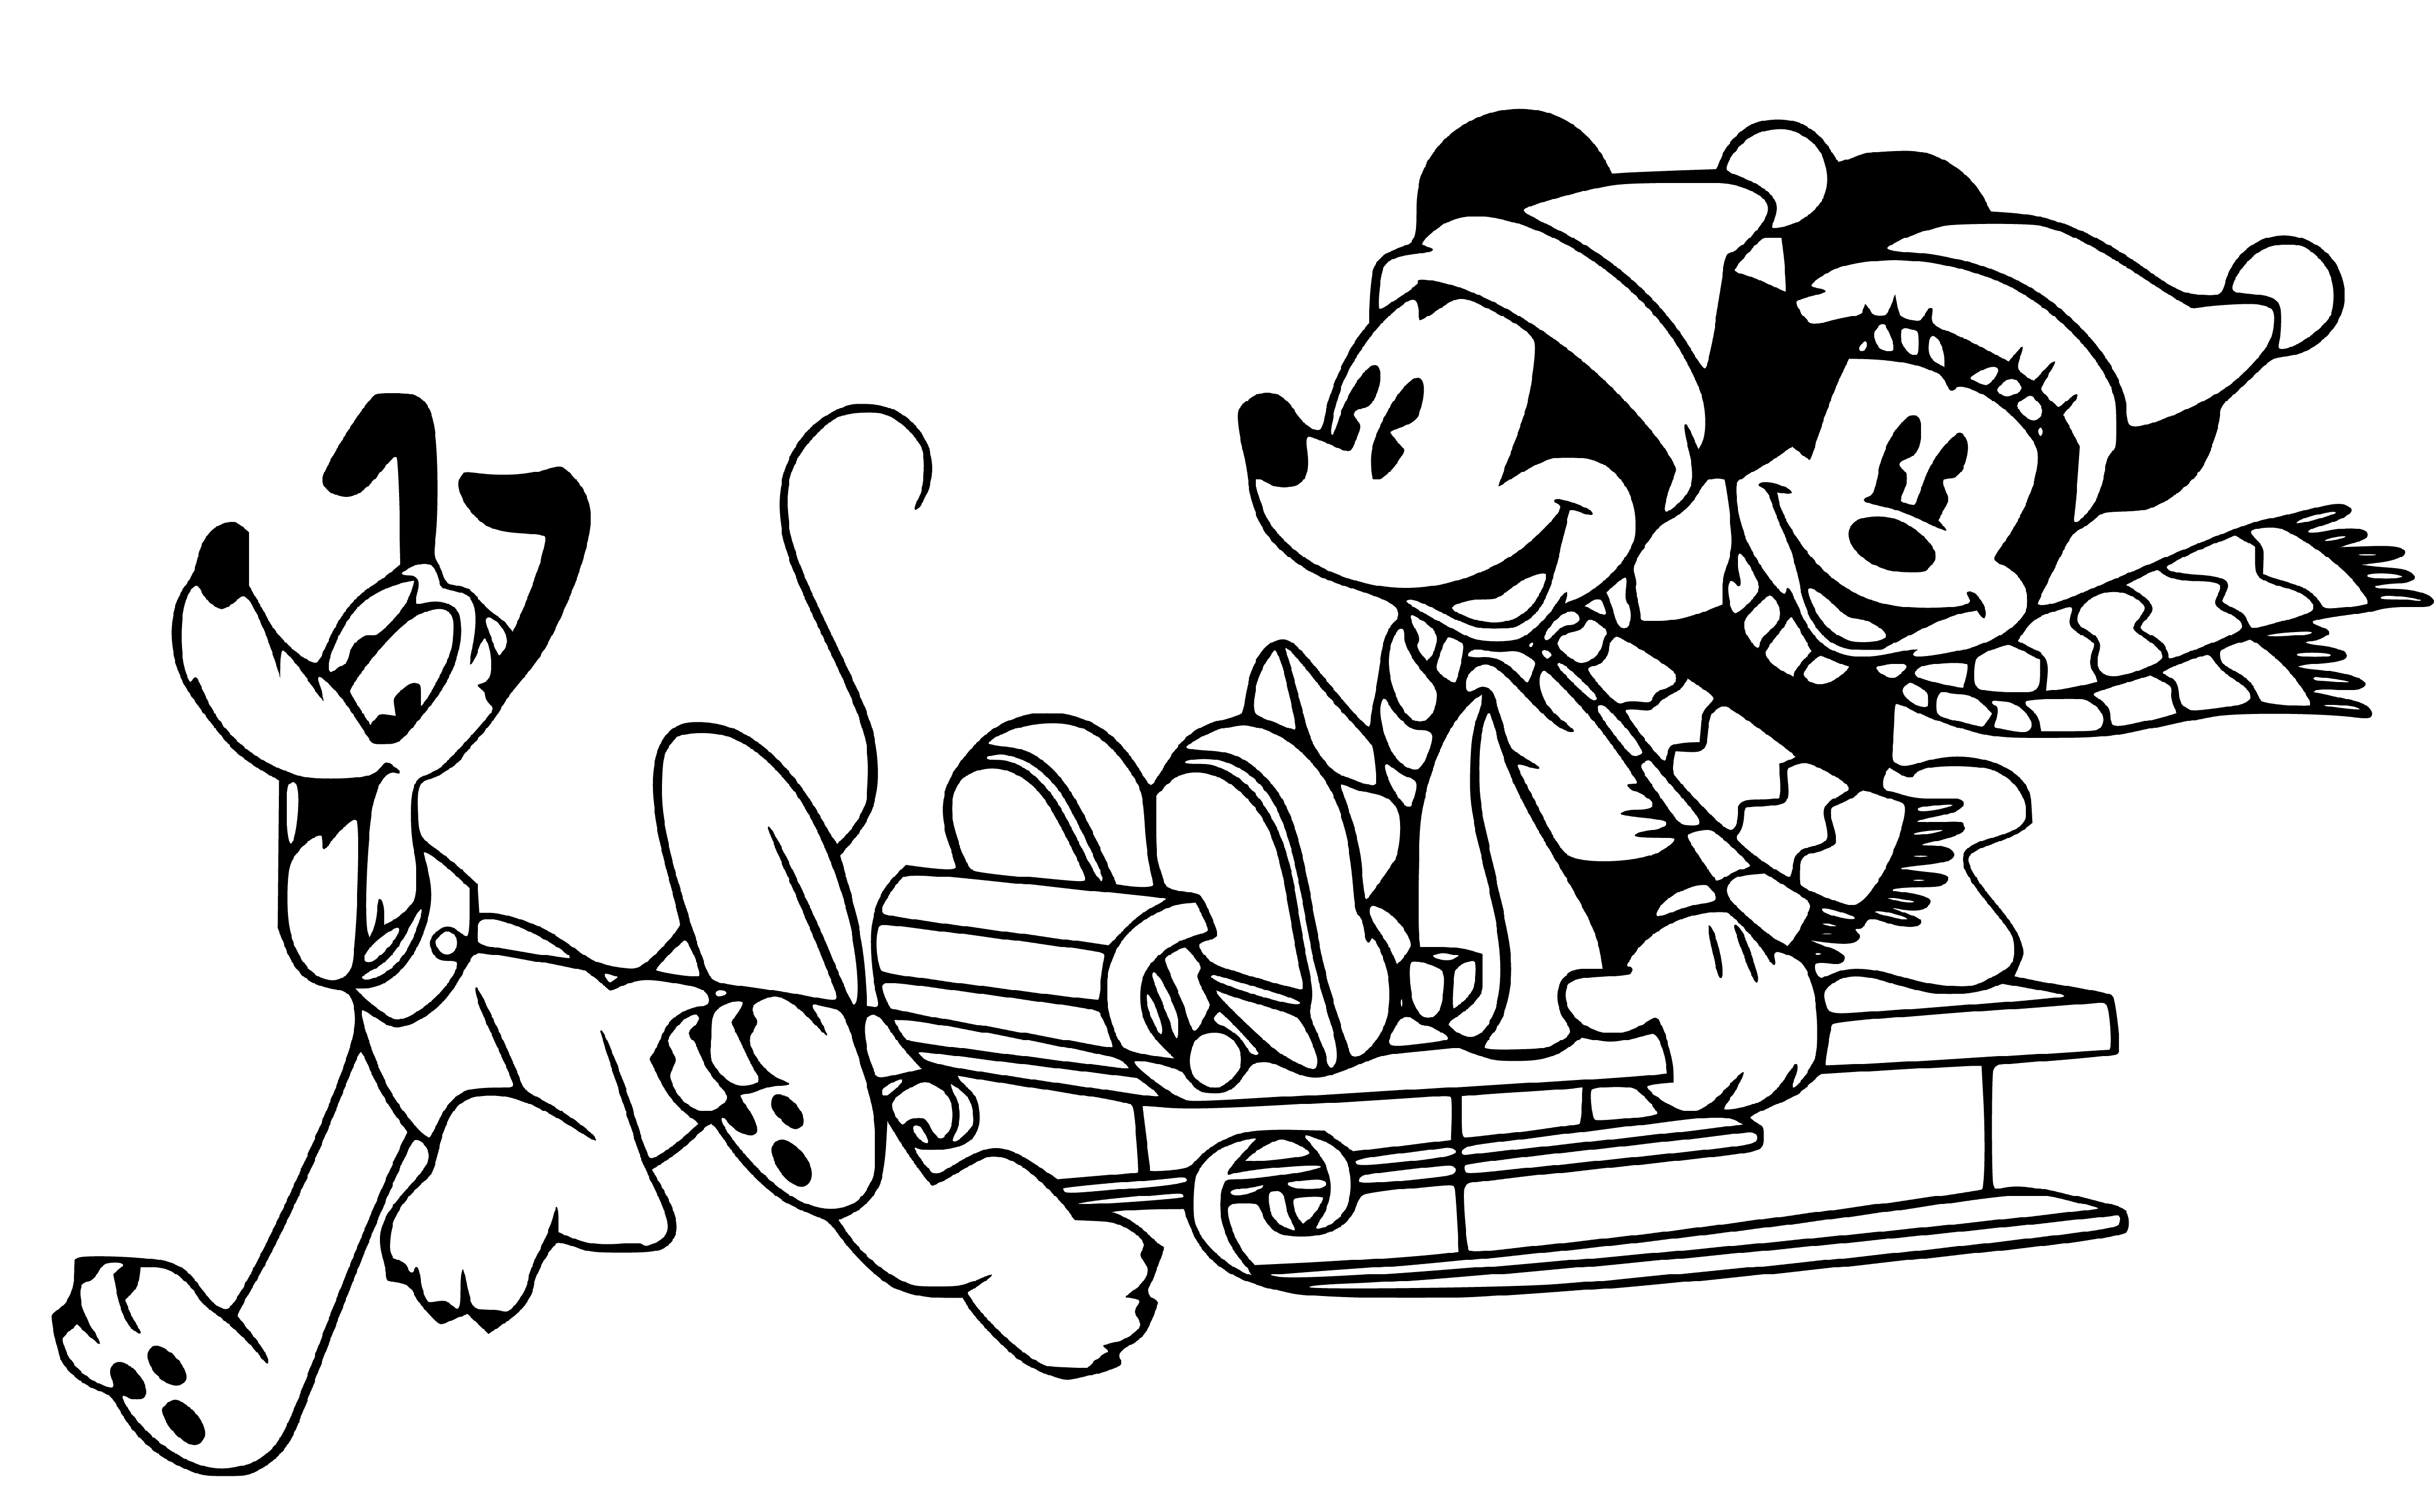 Mickey, Minnie and Pluto Coloring Pages for Kids - SheetalColor.com